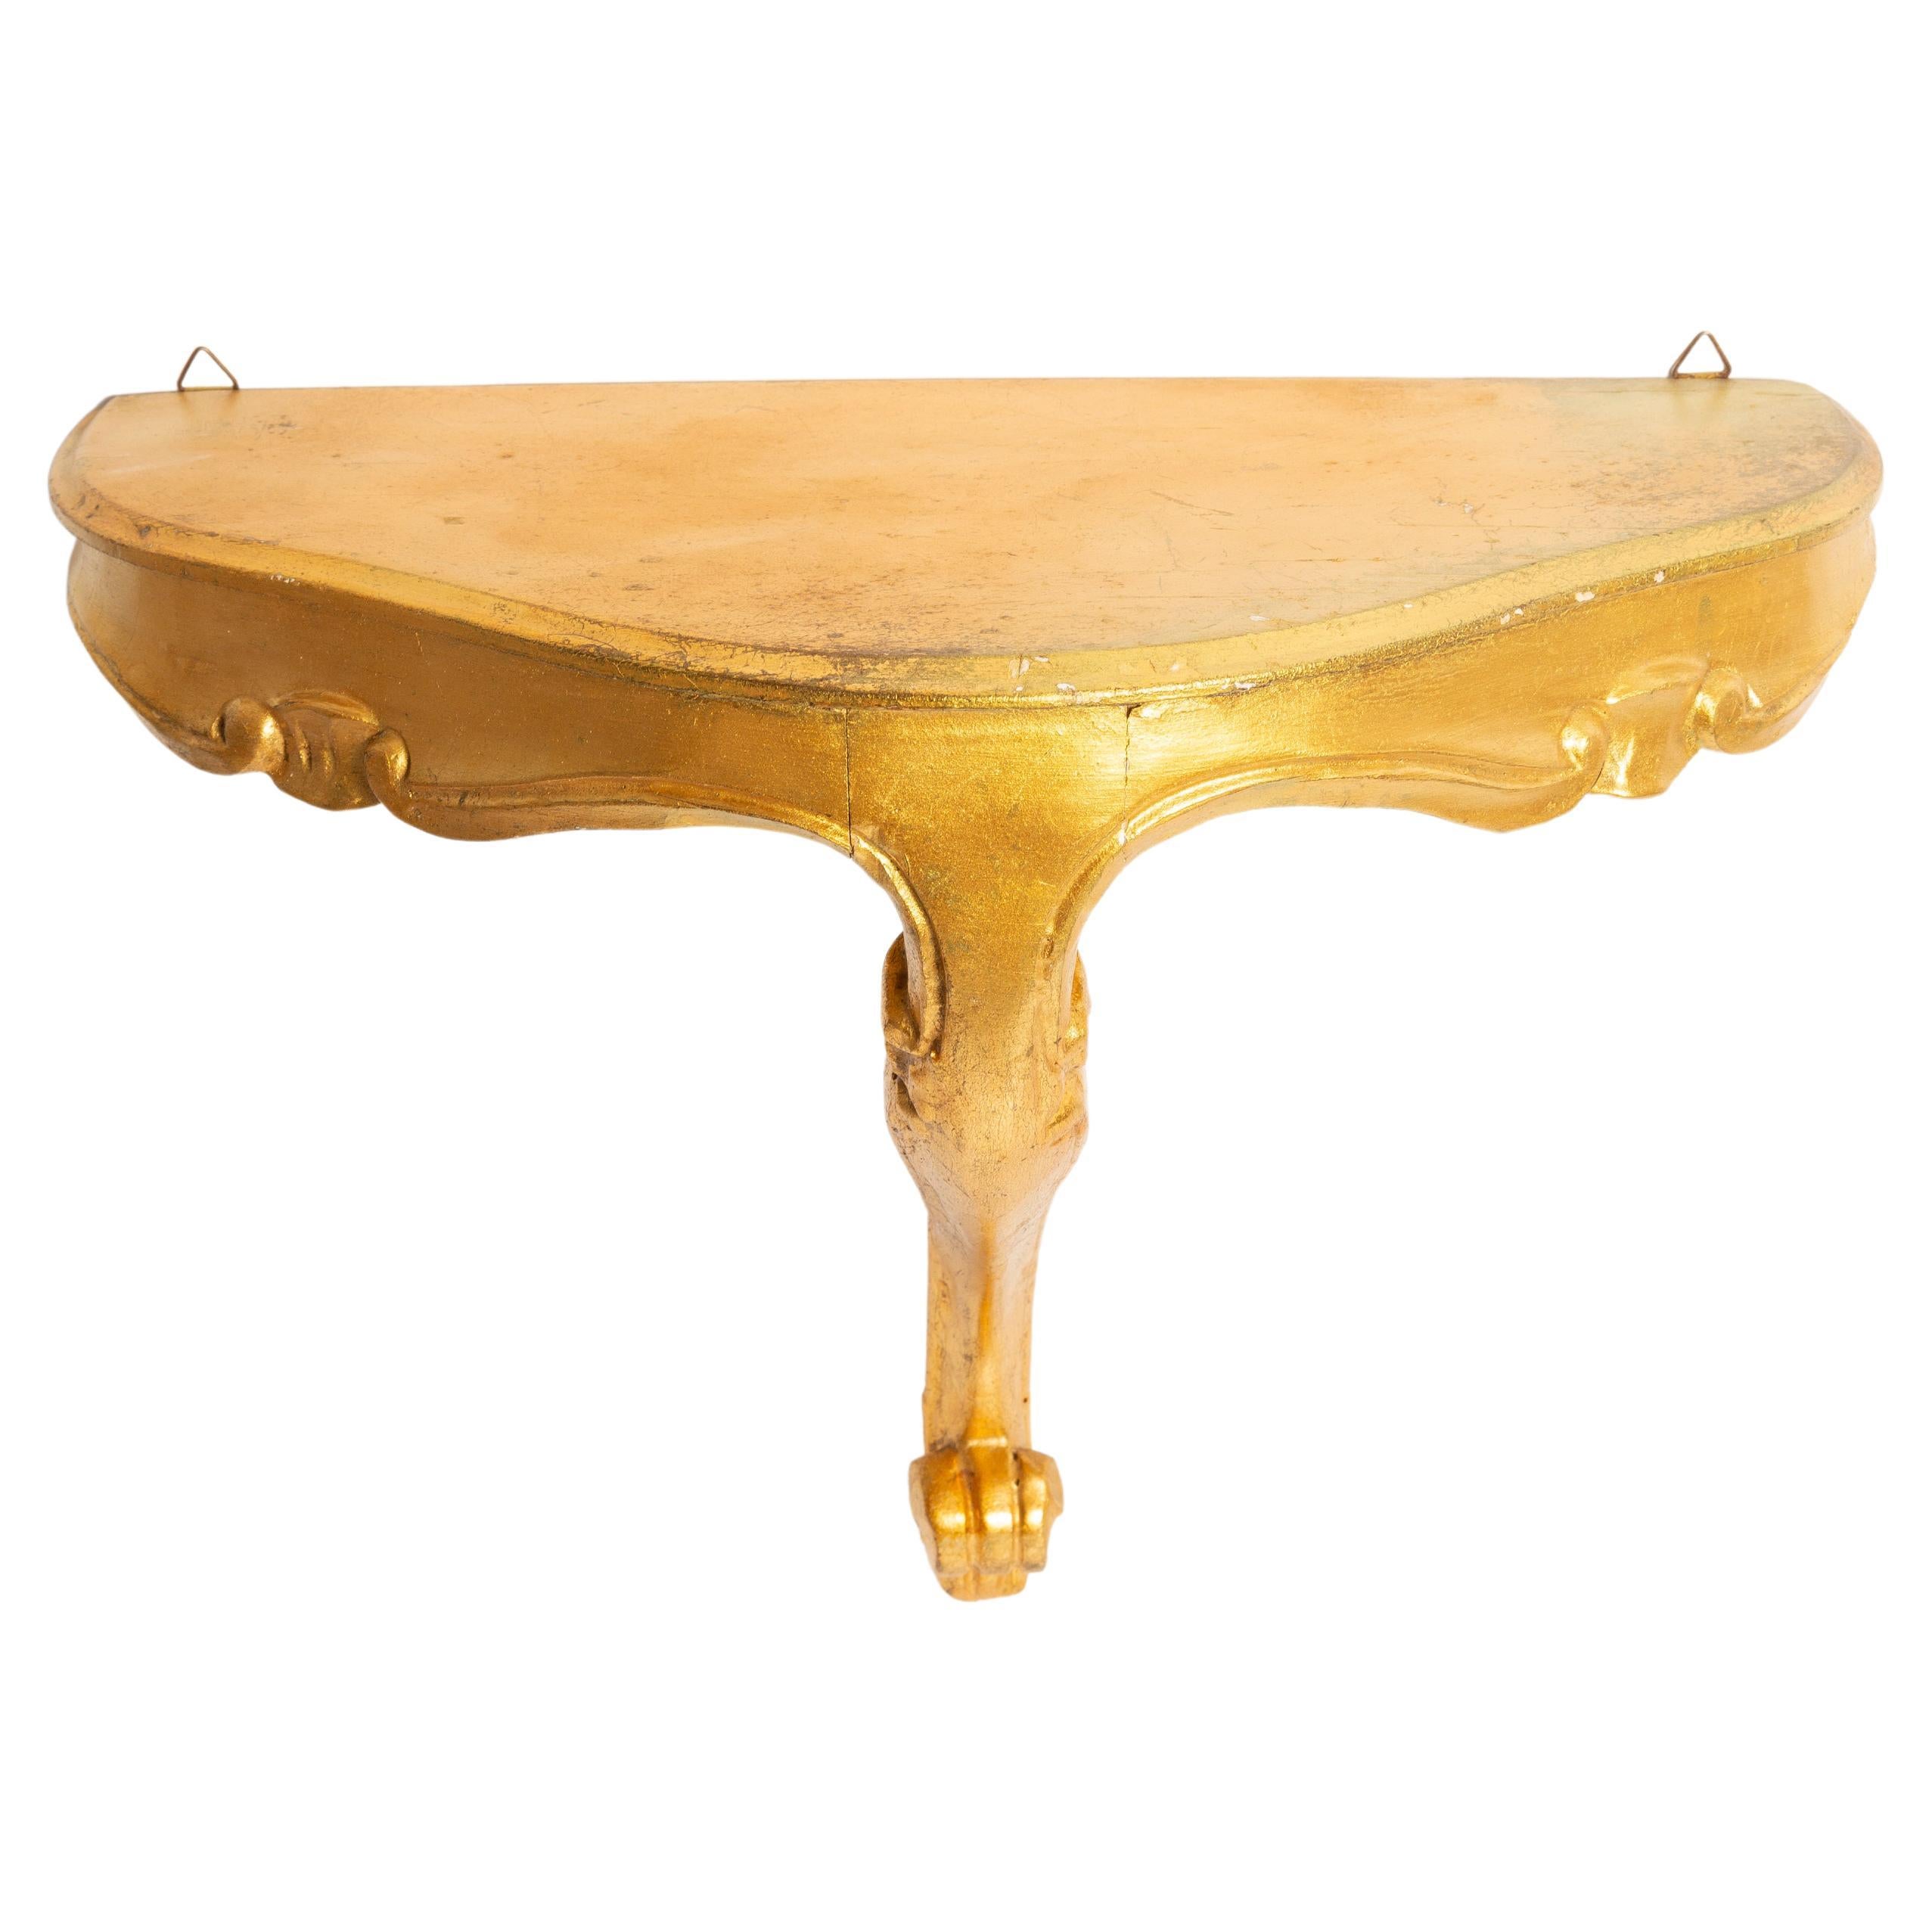 20th Century Wall Console Table Shelf Gold Curvy Decorative Leg, Europe, 1960s For Sale